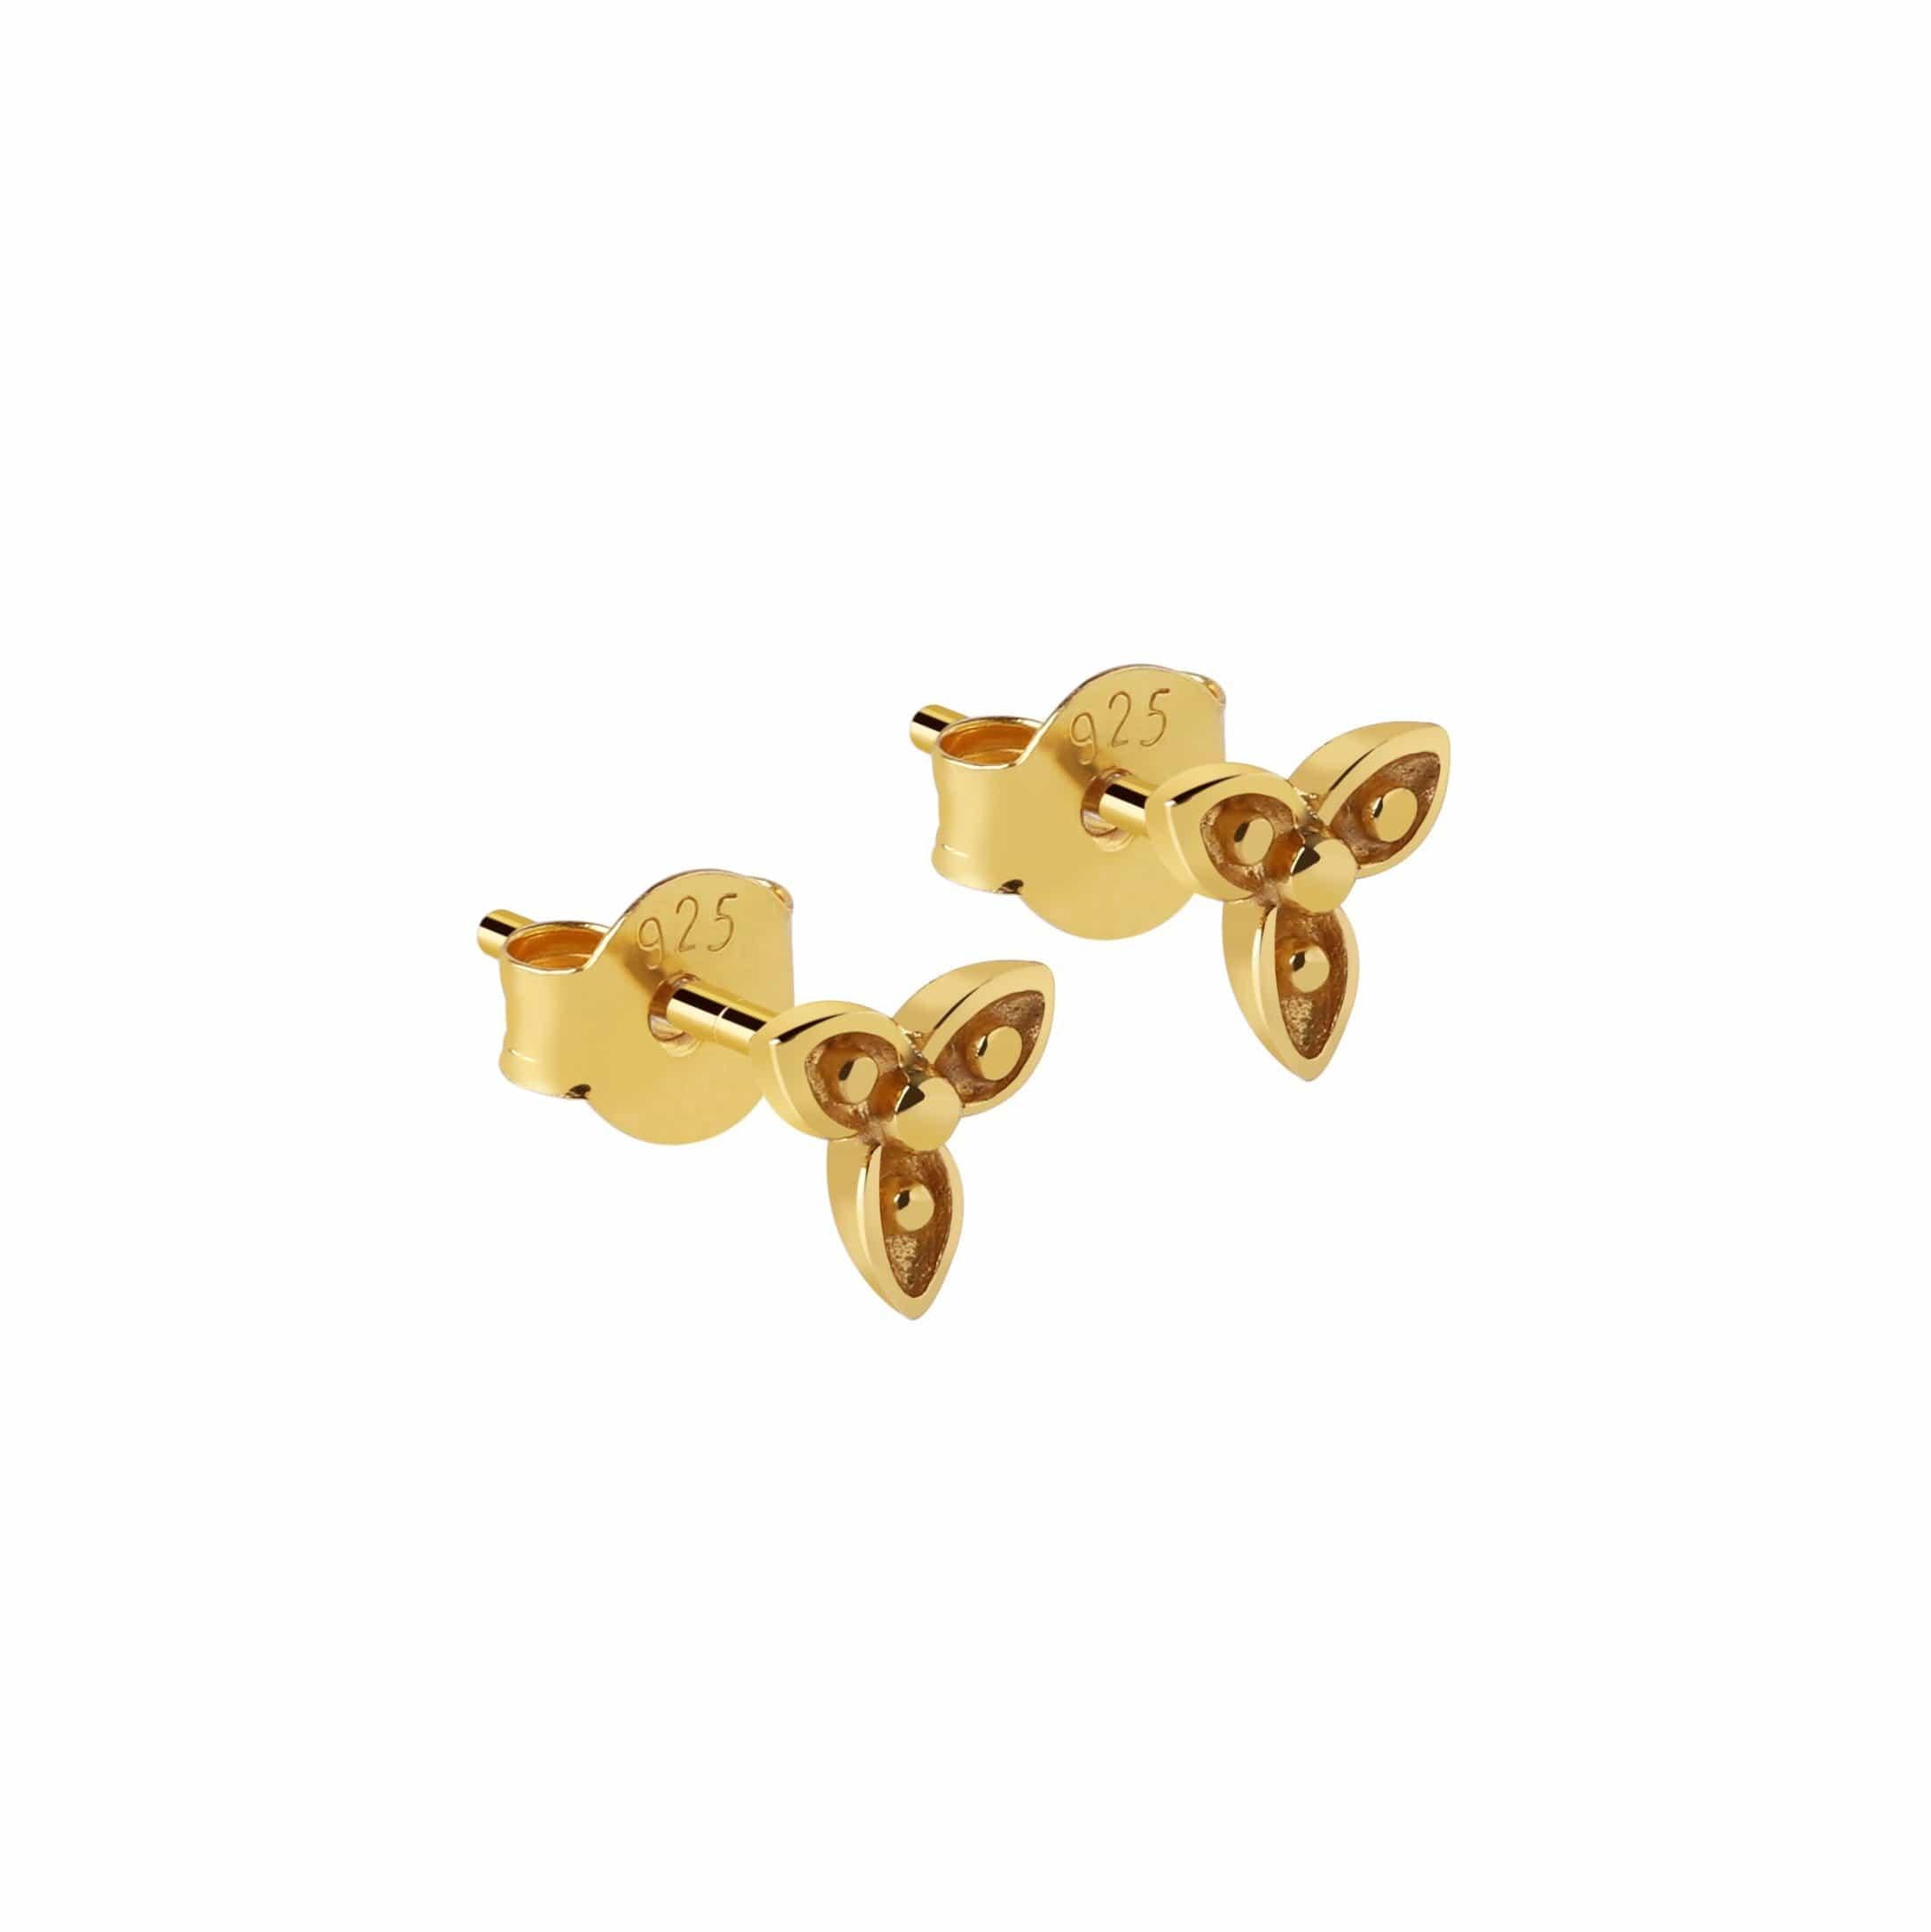 Gold Plated Clover Stud Earrings - Juulry.com